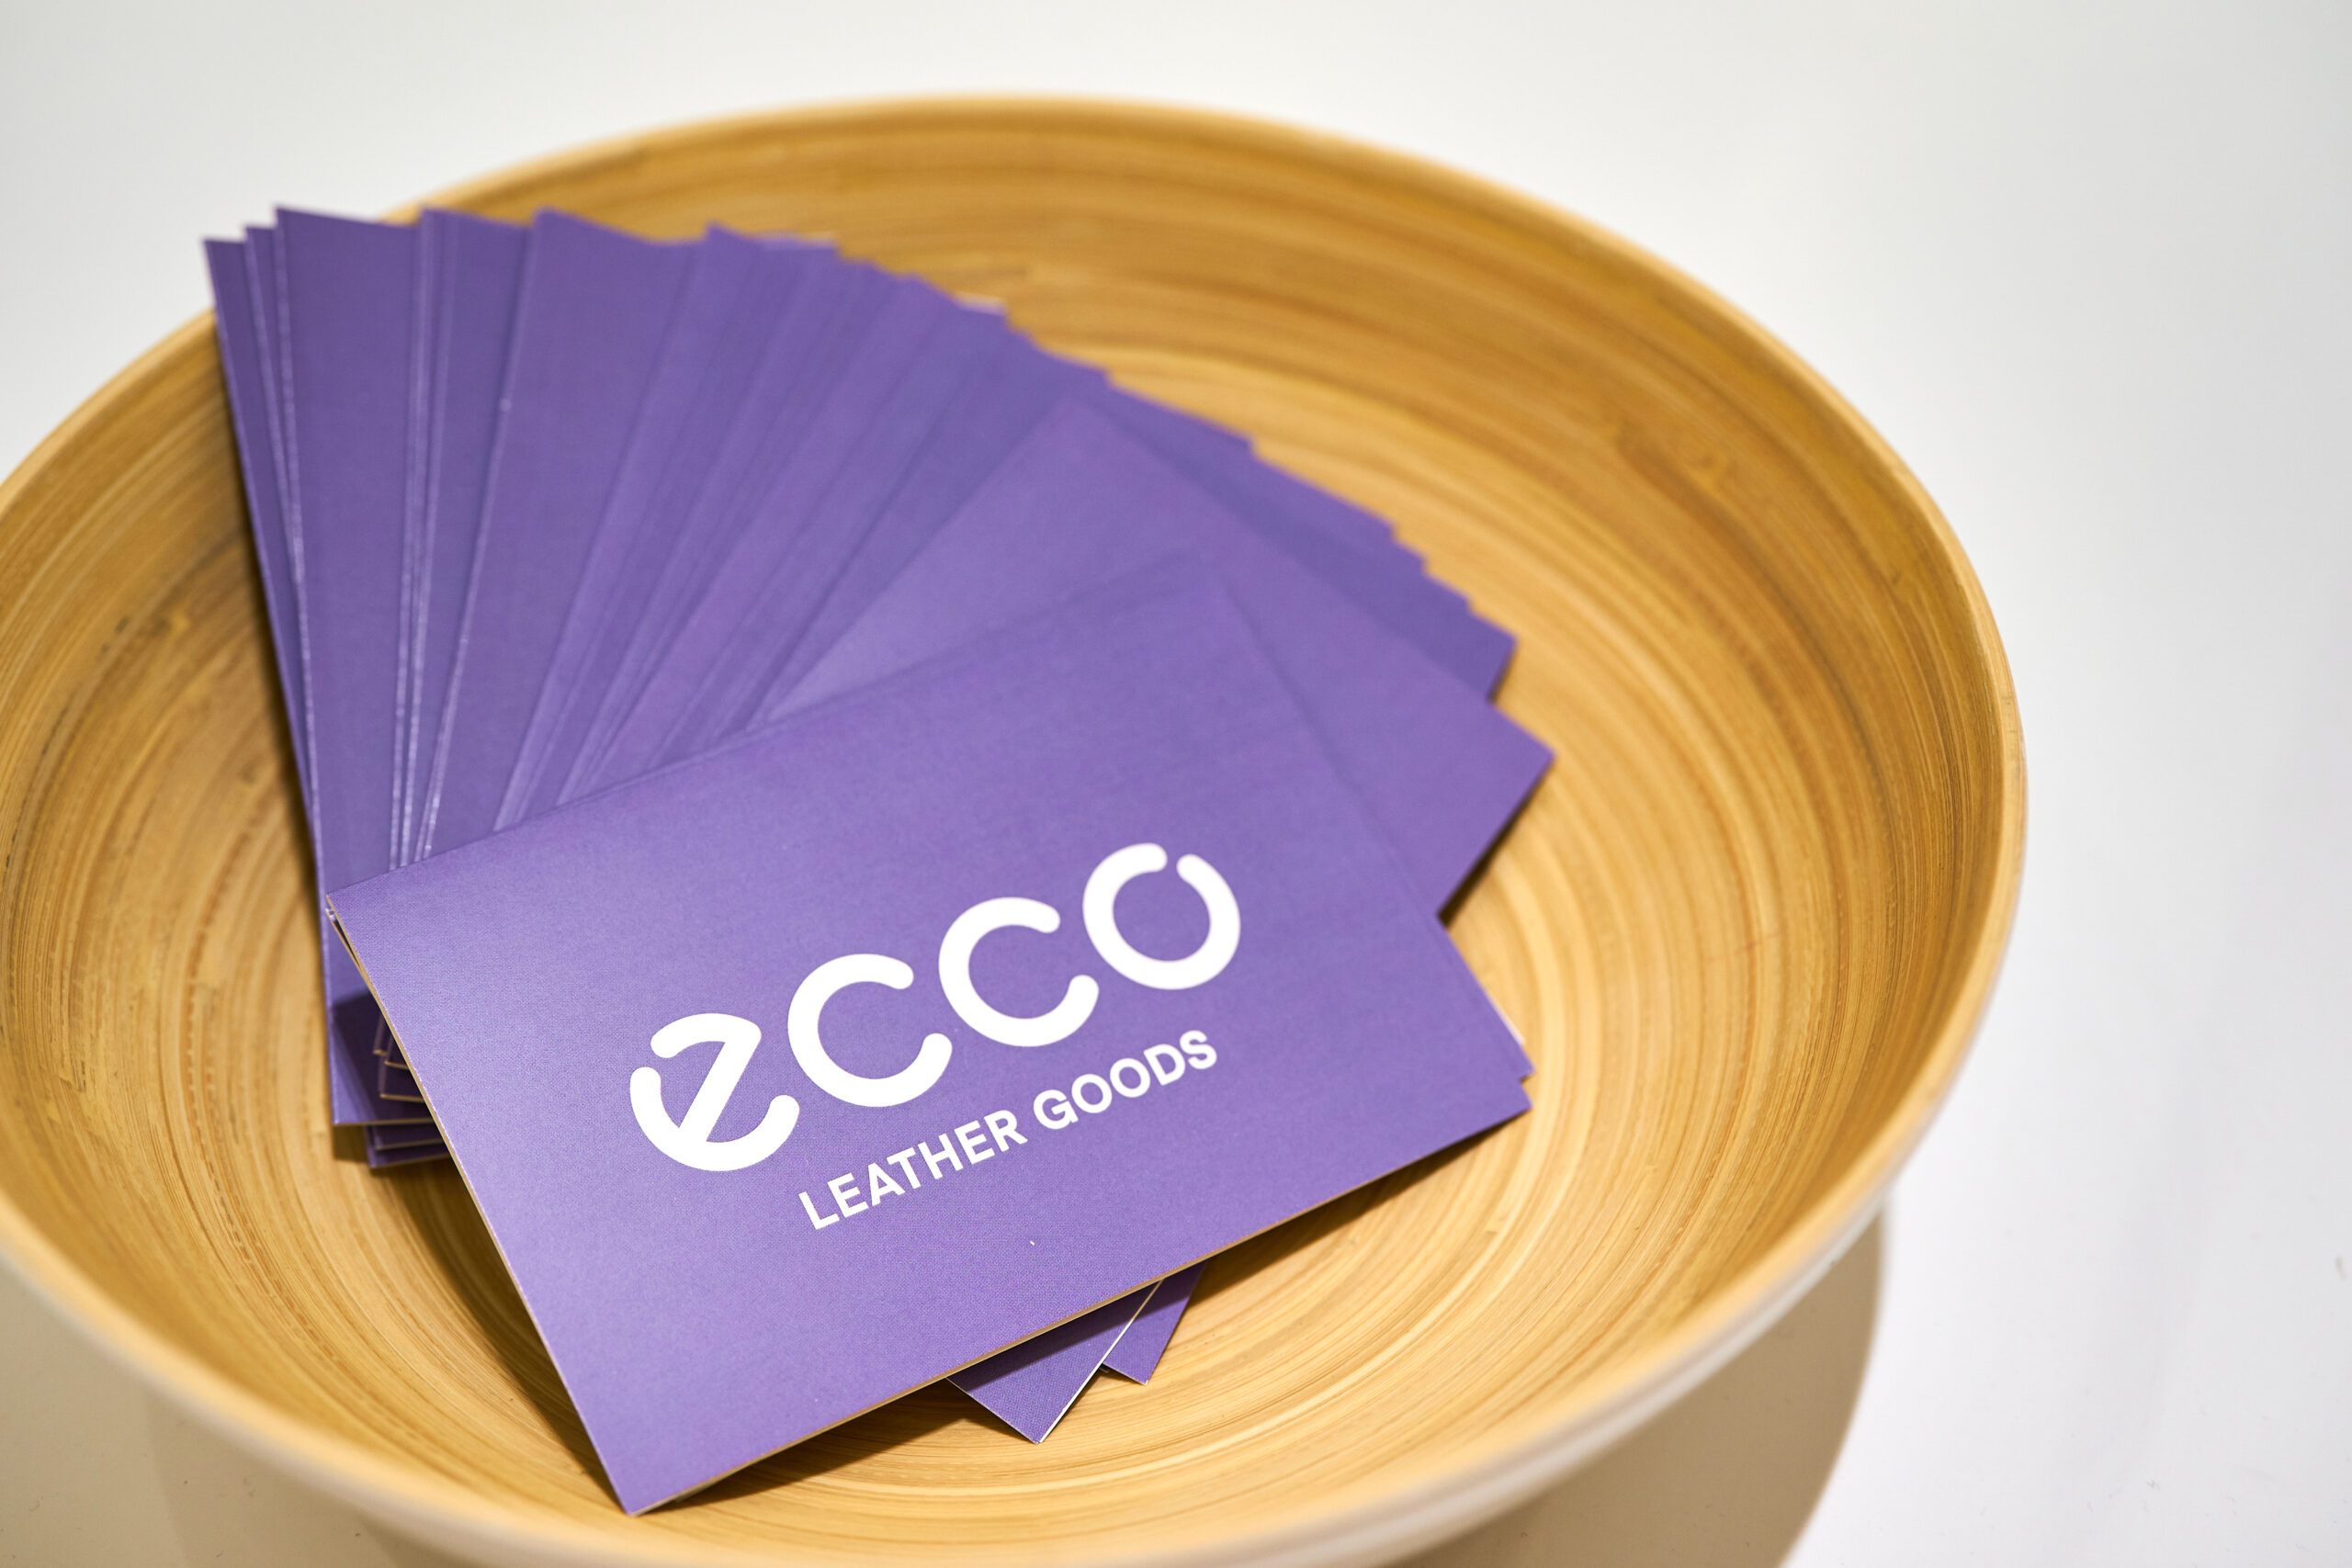 jord Juice analyse ECCO is excited to introduce their newest line: ECCO Leather Goods  alongside David Umemoto's exclusive art launch.! -